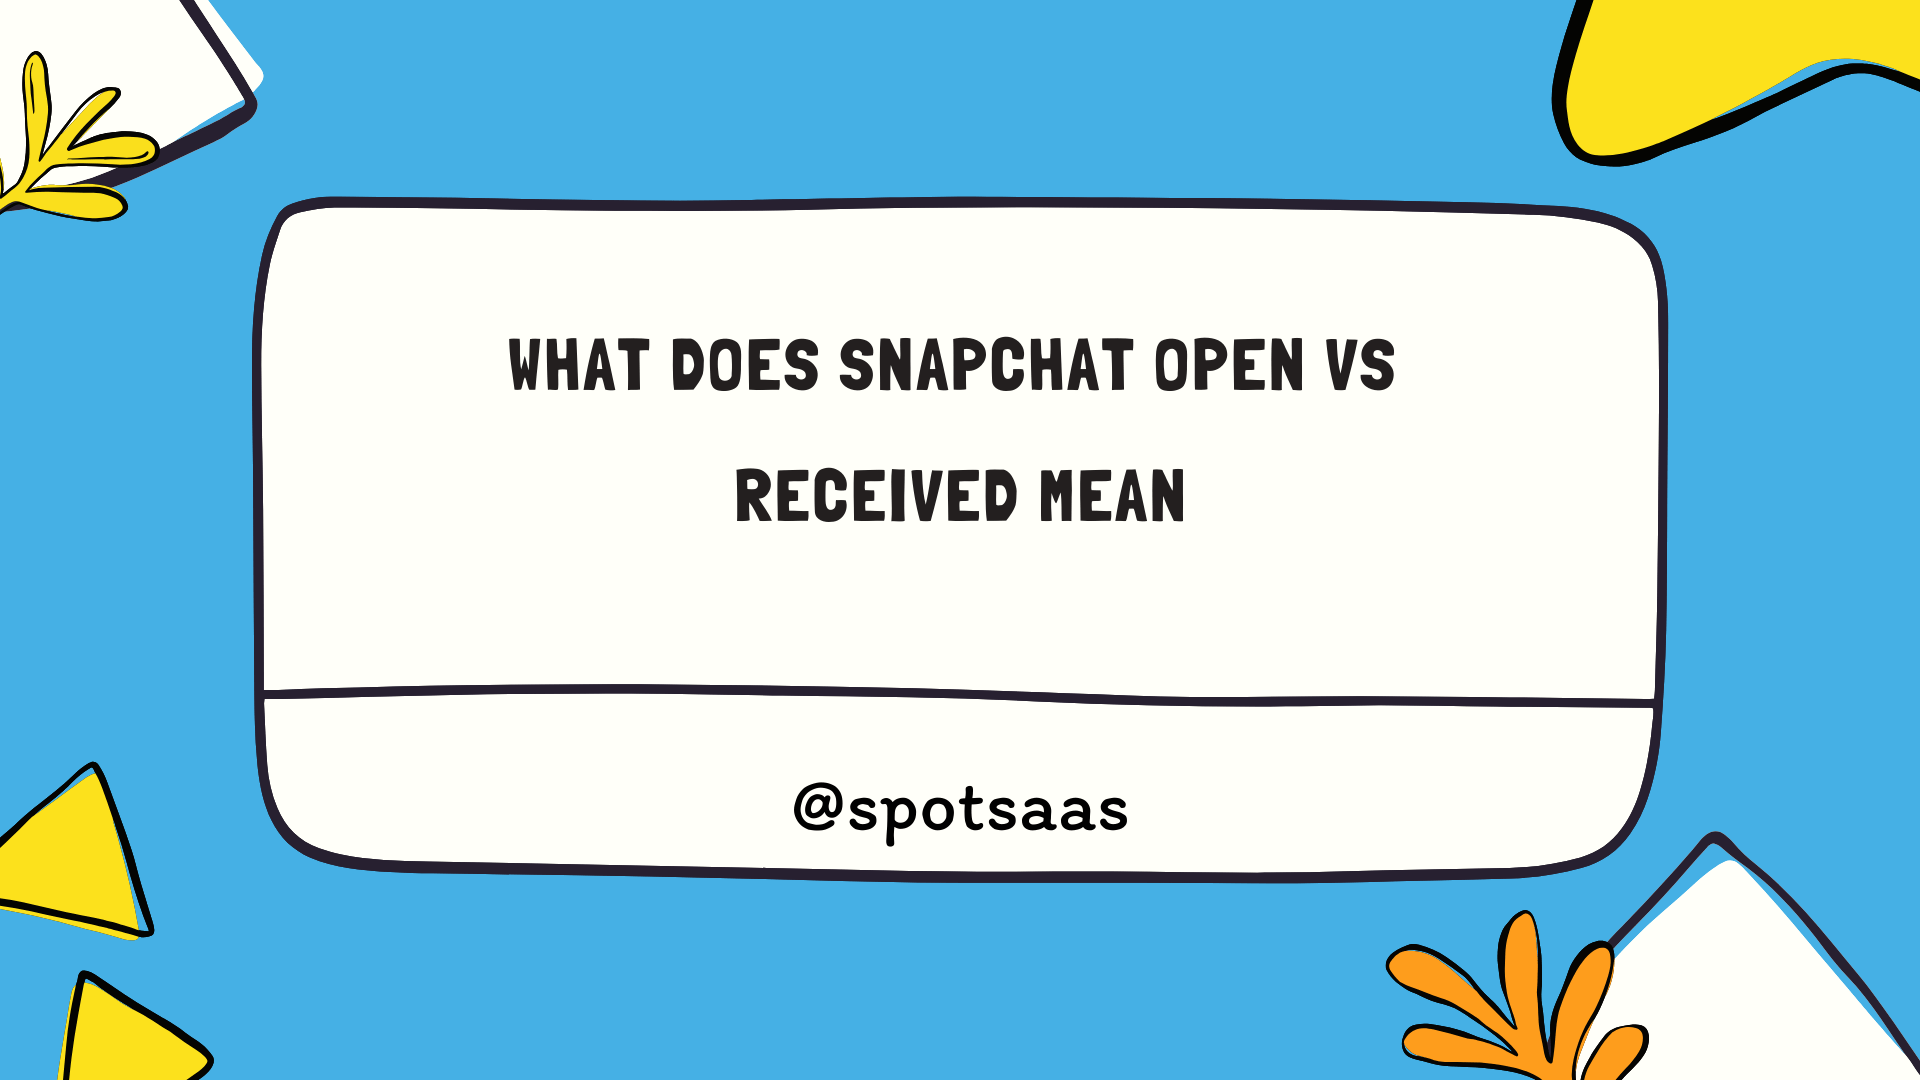 Snapchat Opened vs Received